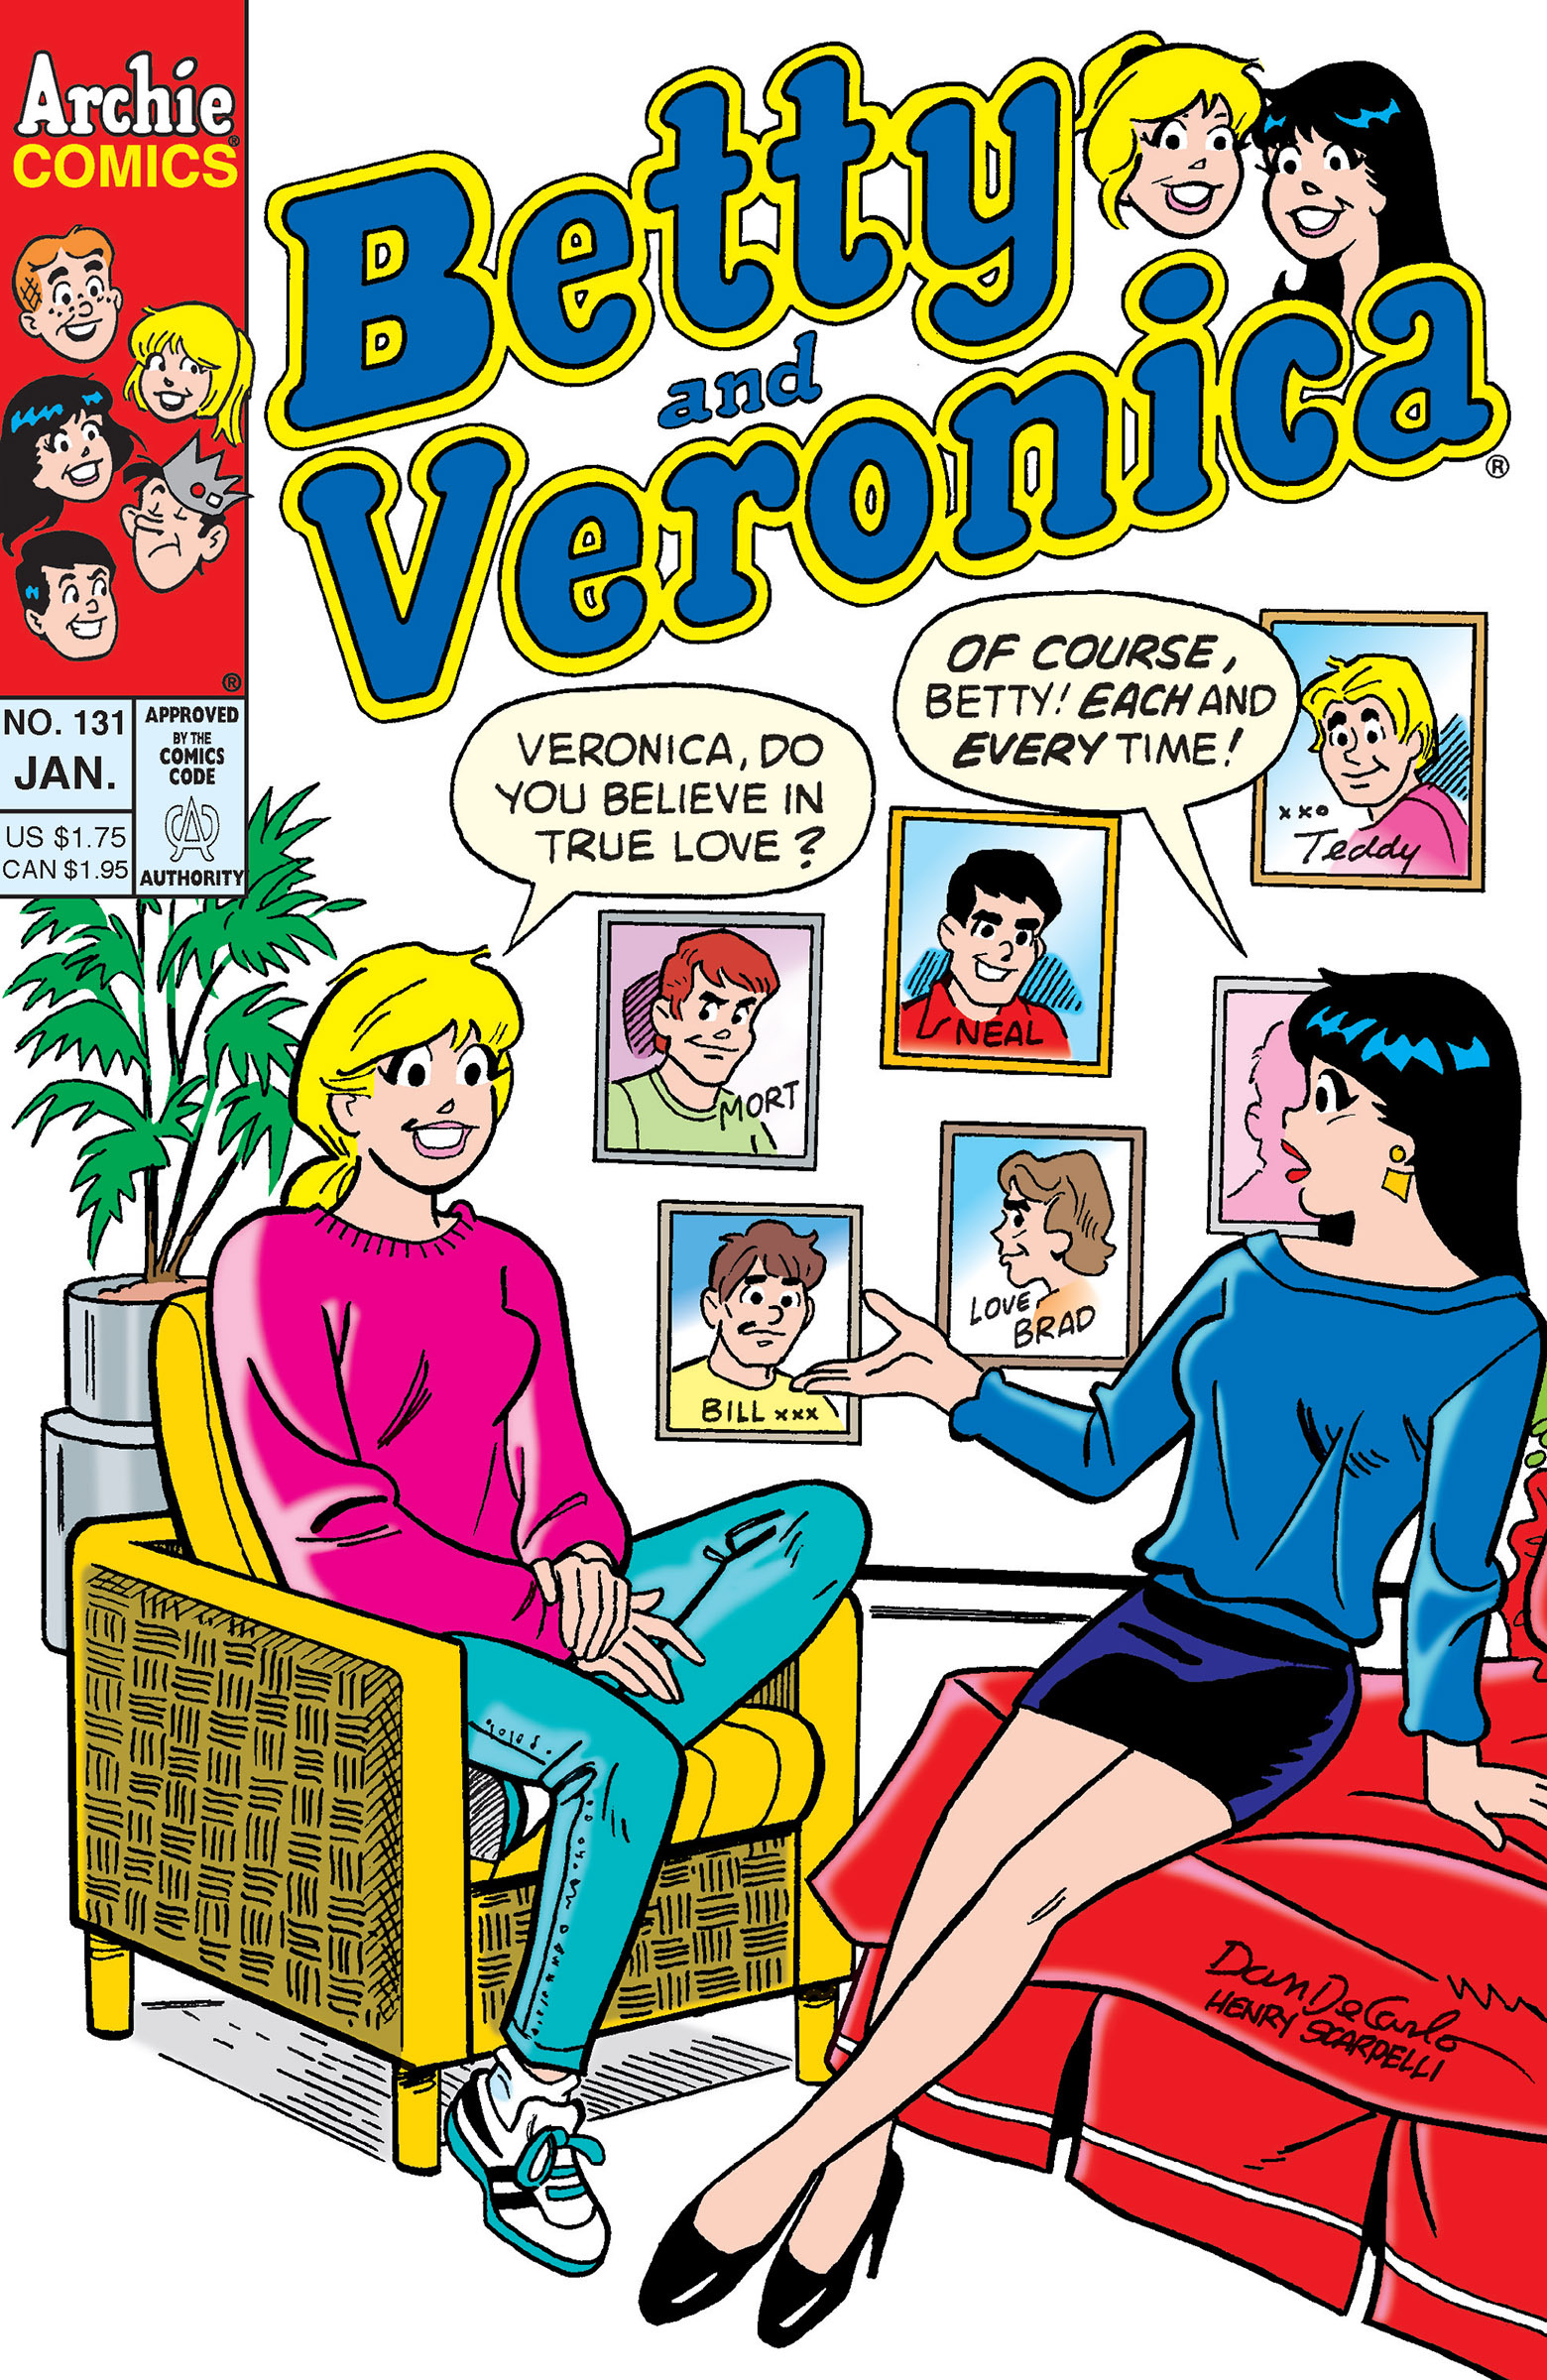 Betty and Veronica talk about Veronica's past loves, all of whom she has a framed photo of hanging up in her room.